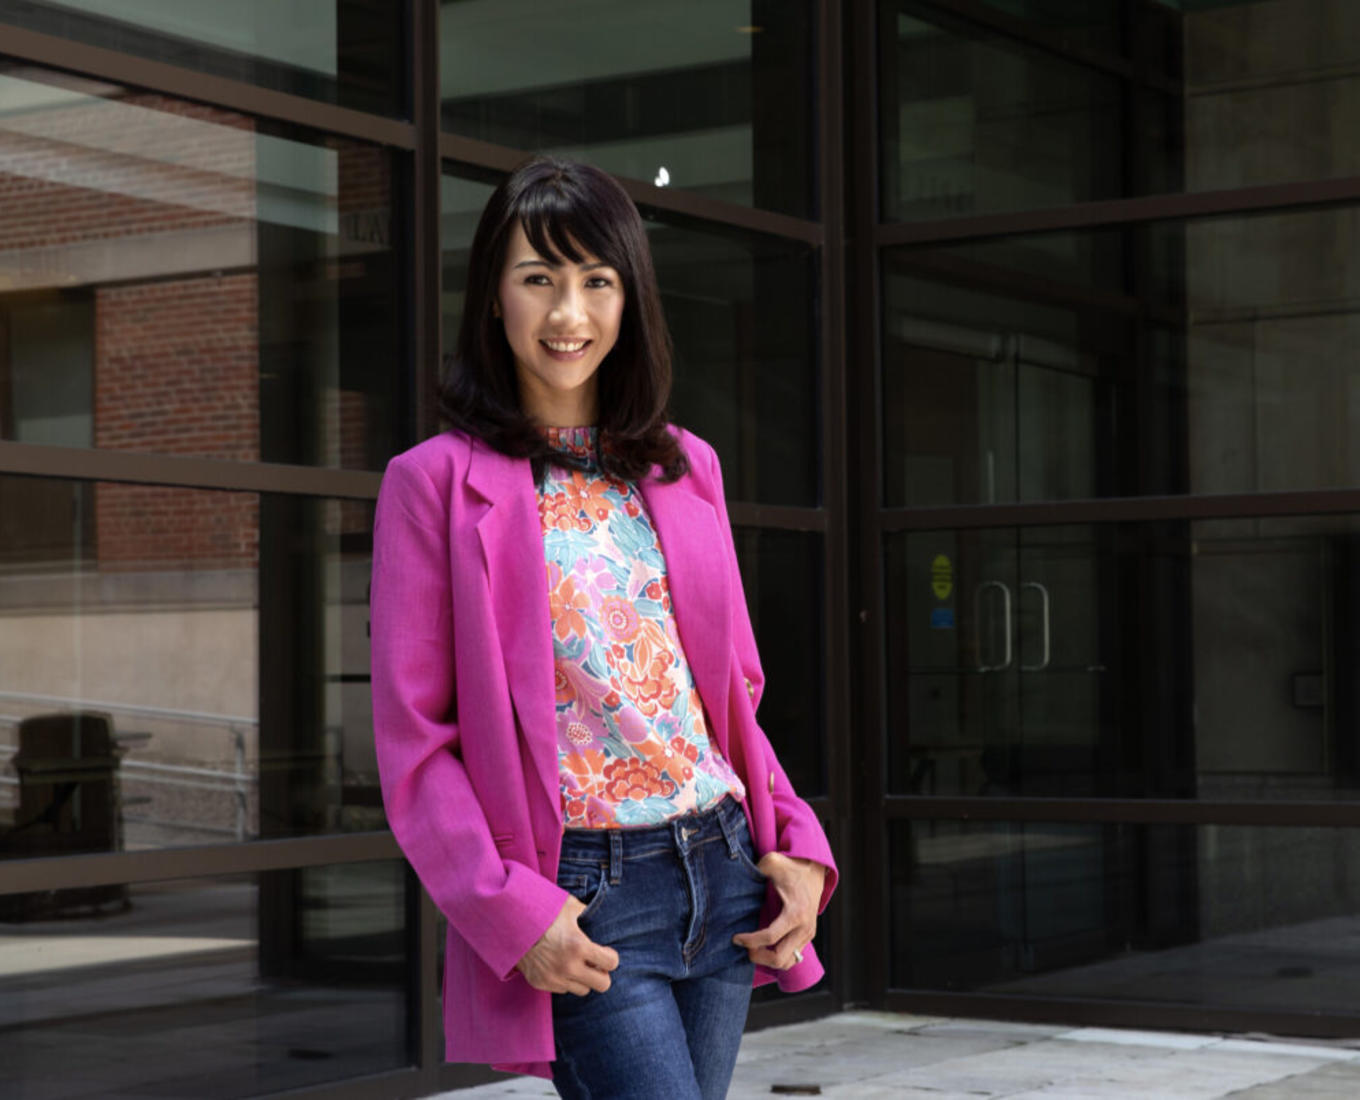 Woman posing in front of large windows wearing a pink suit jacket, floral shirt and jeans.